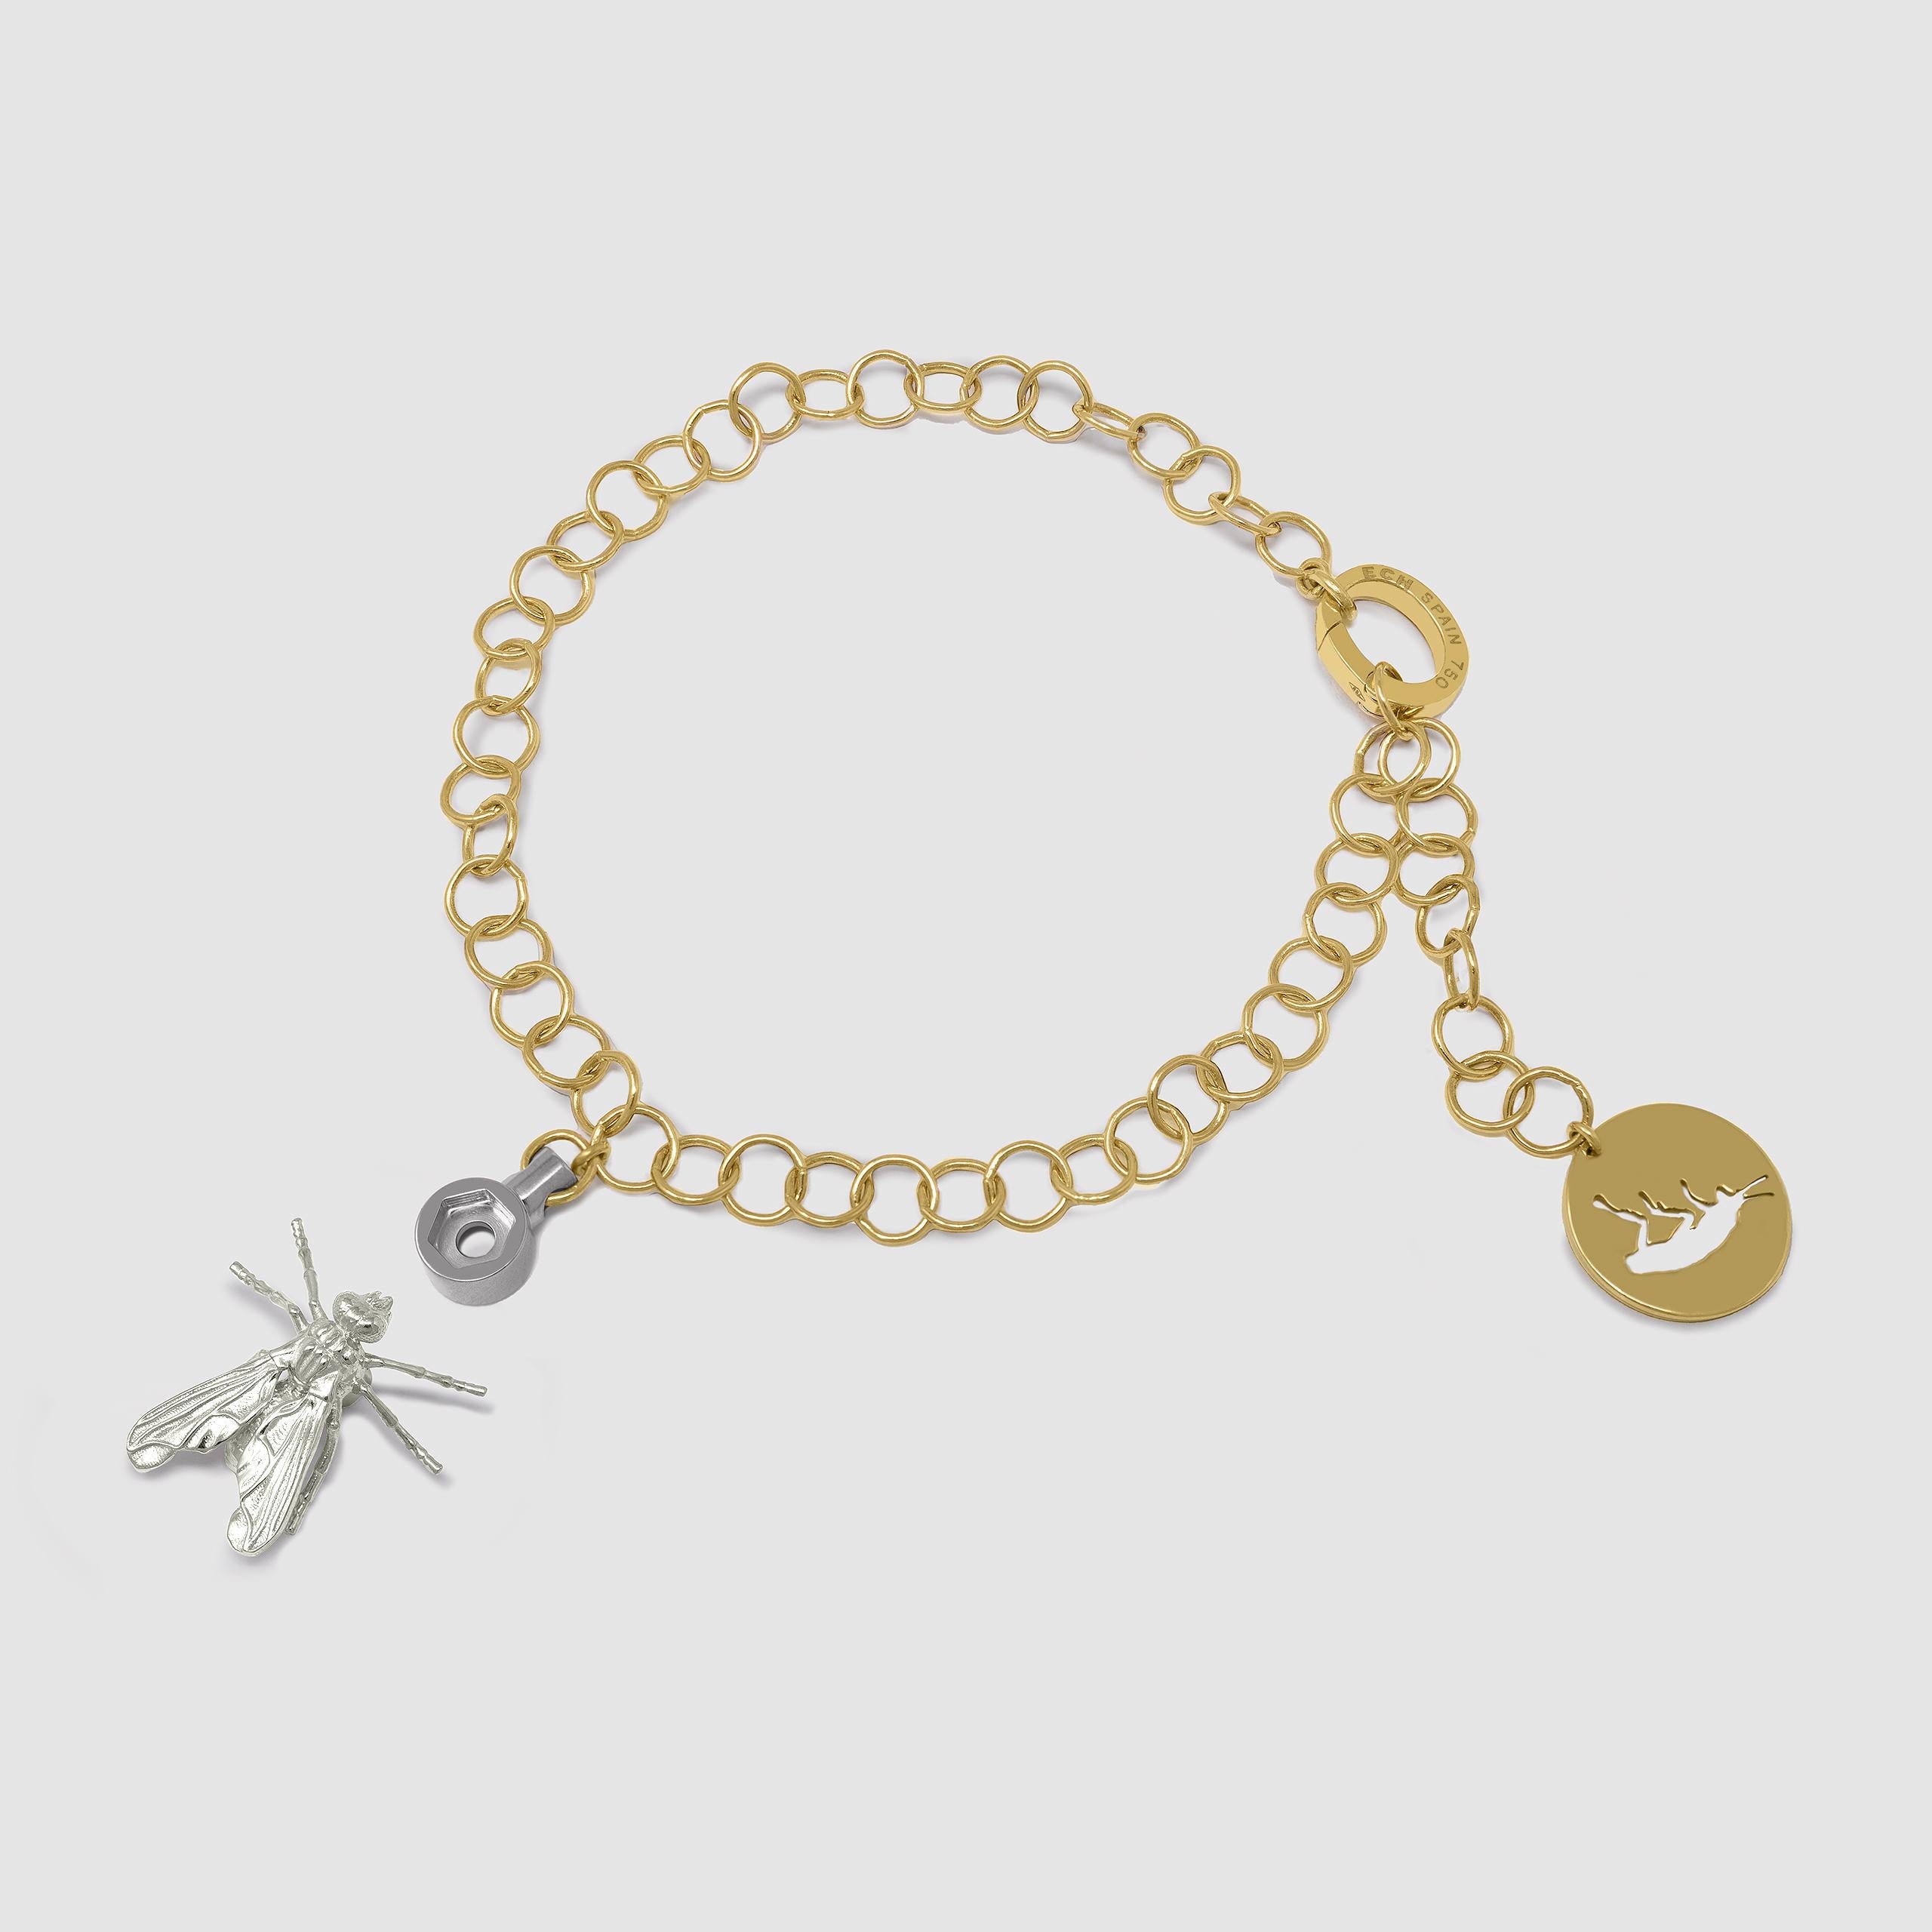 18K Yellow and White Gold Fine Chain Bracelet
·18K Yellow Gold Chain Bracelet
·Hyperrealistic Fly in White Gold, 18K

Minimum length - 16 cm, maximum length - 19 cm.

You can put on and take off the Fly in a Chain bracelet.
This is only possible